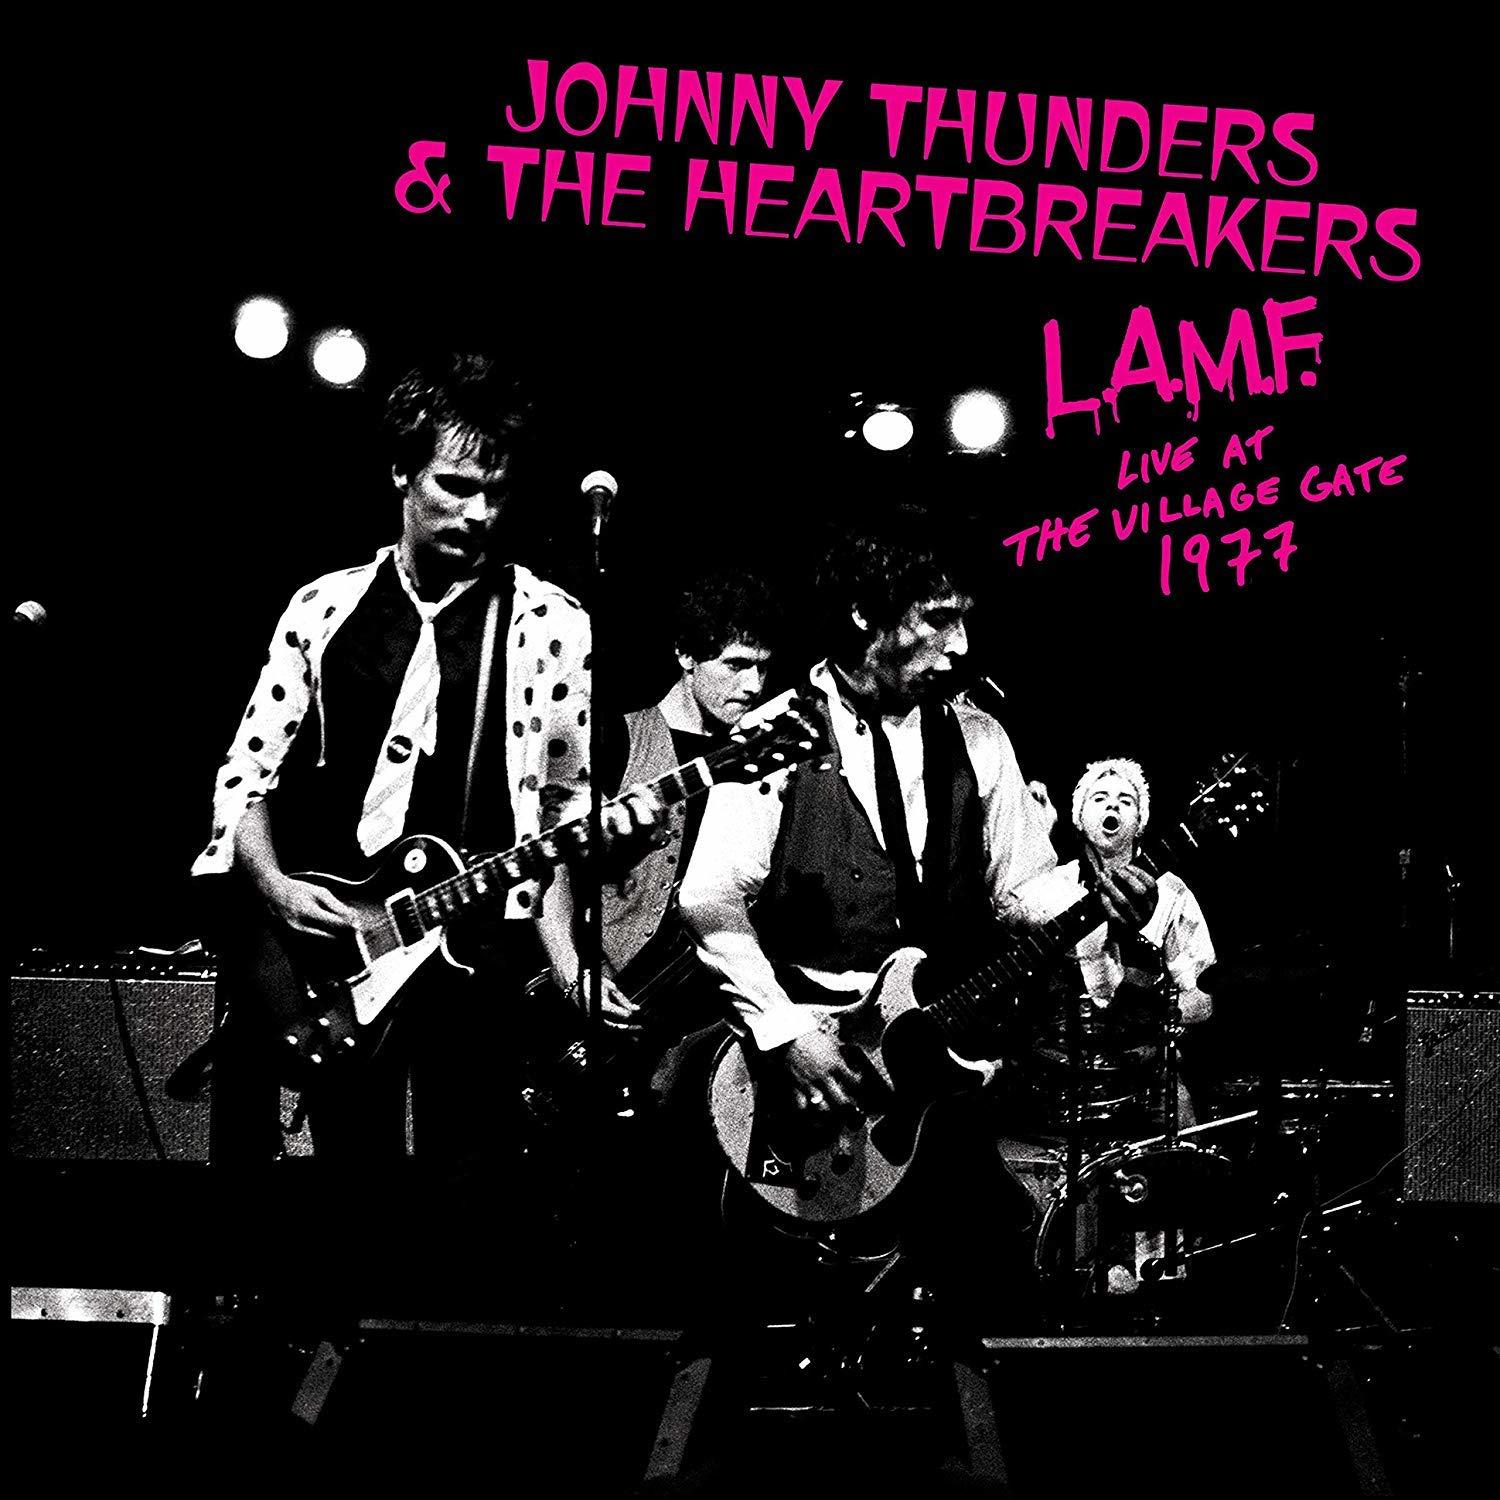 1977 LIVE Thunders L.A.M.F. (Vinyl) GATE The Johnny AT Heartbreakers THE & - - VILLAGE